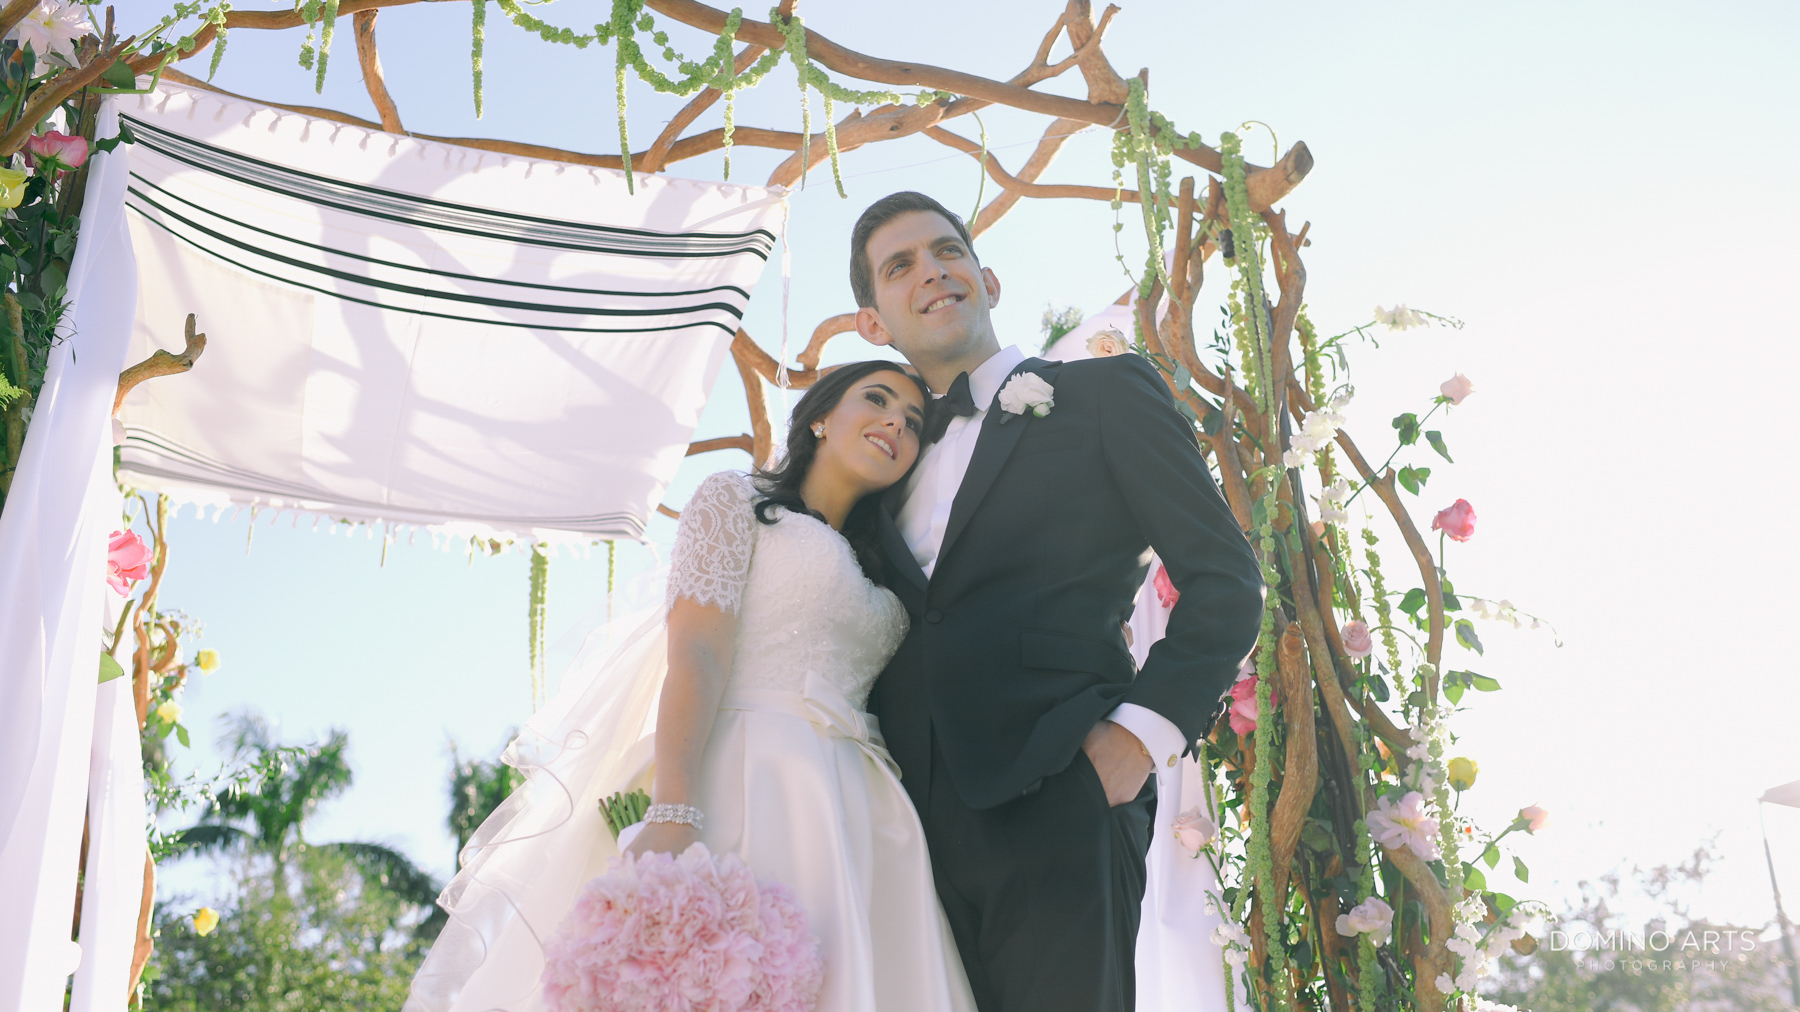 Fun natural wedding couple and decor pictures at Turnberry Isles Miami